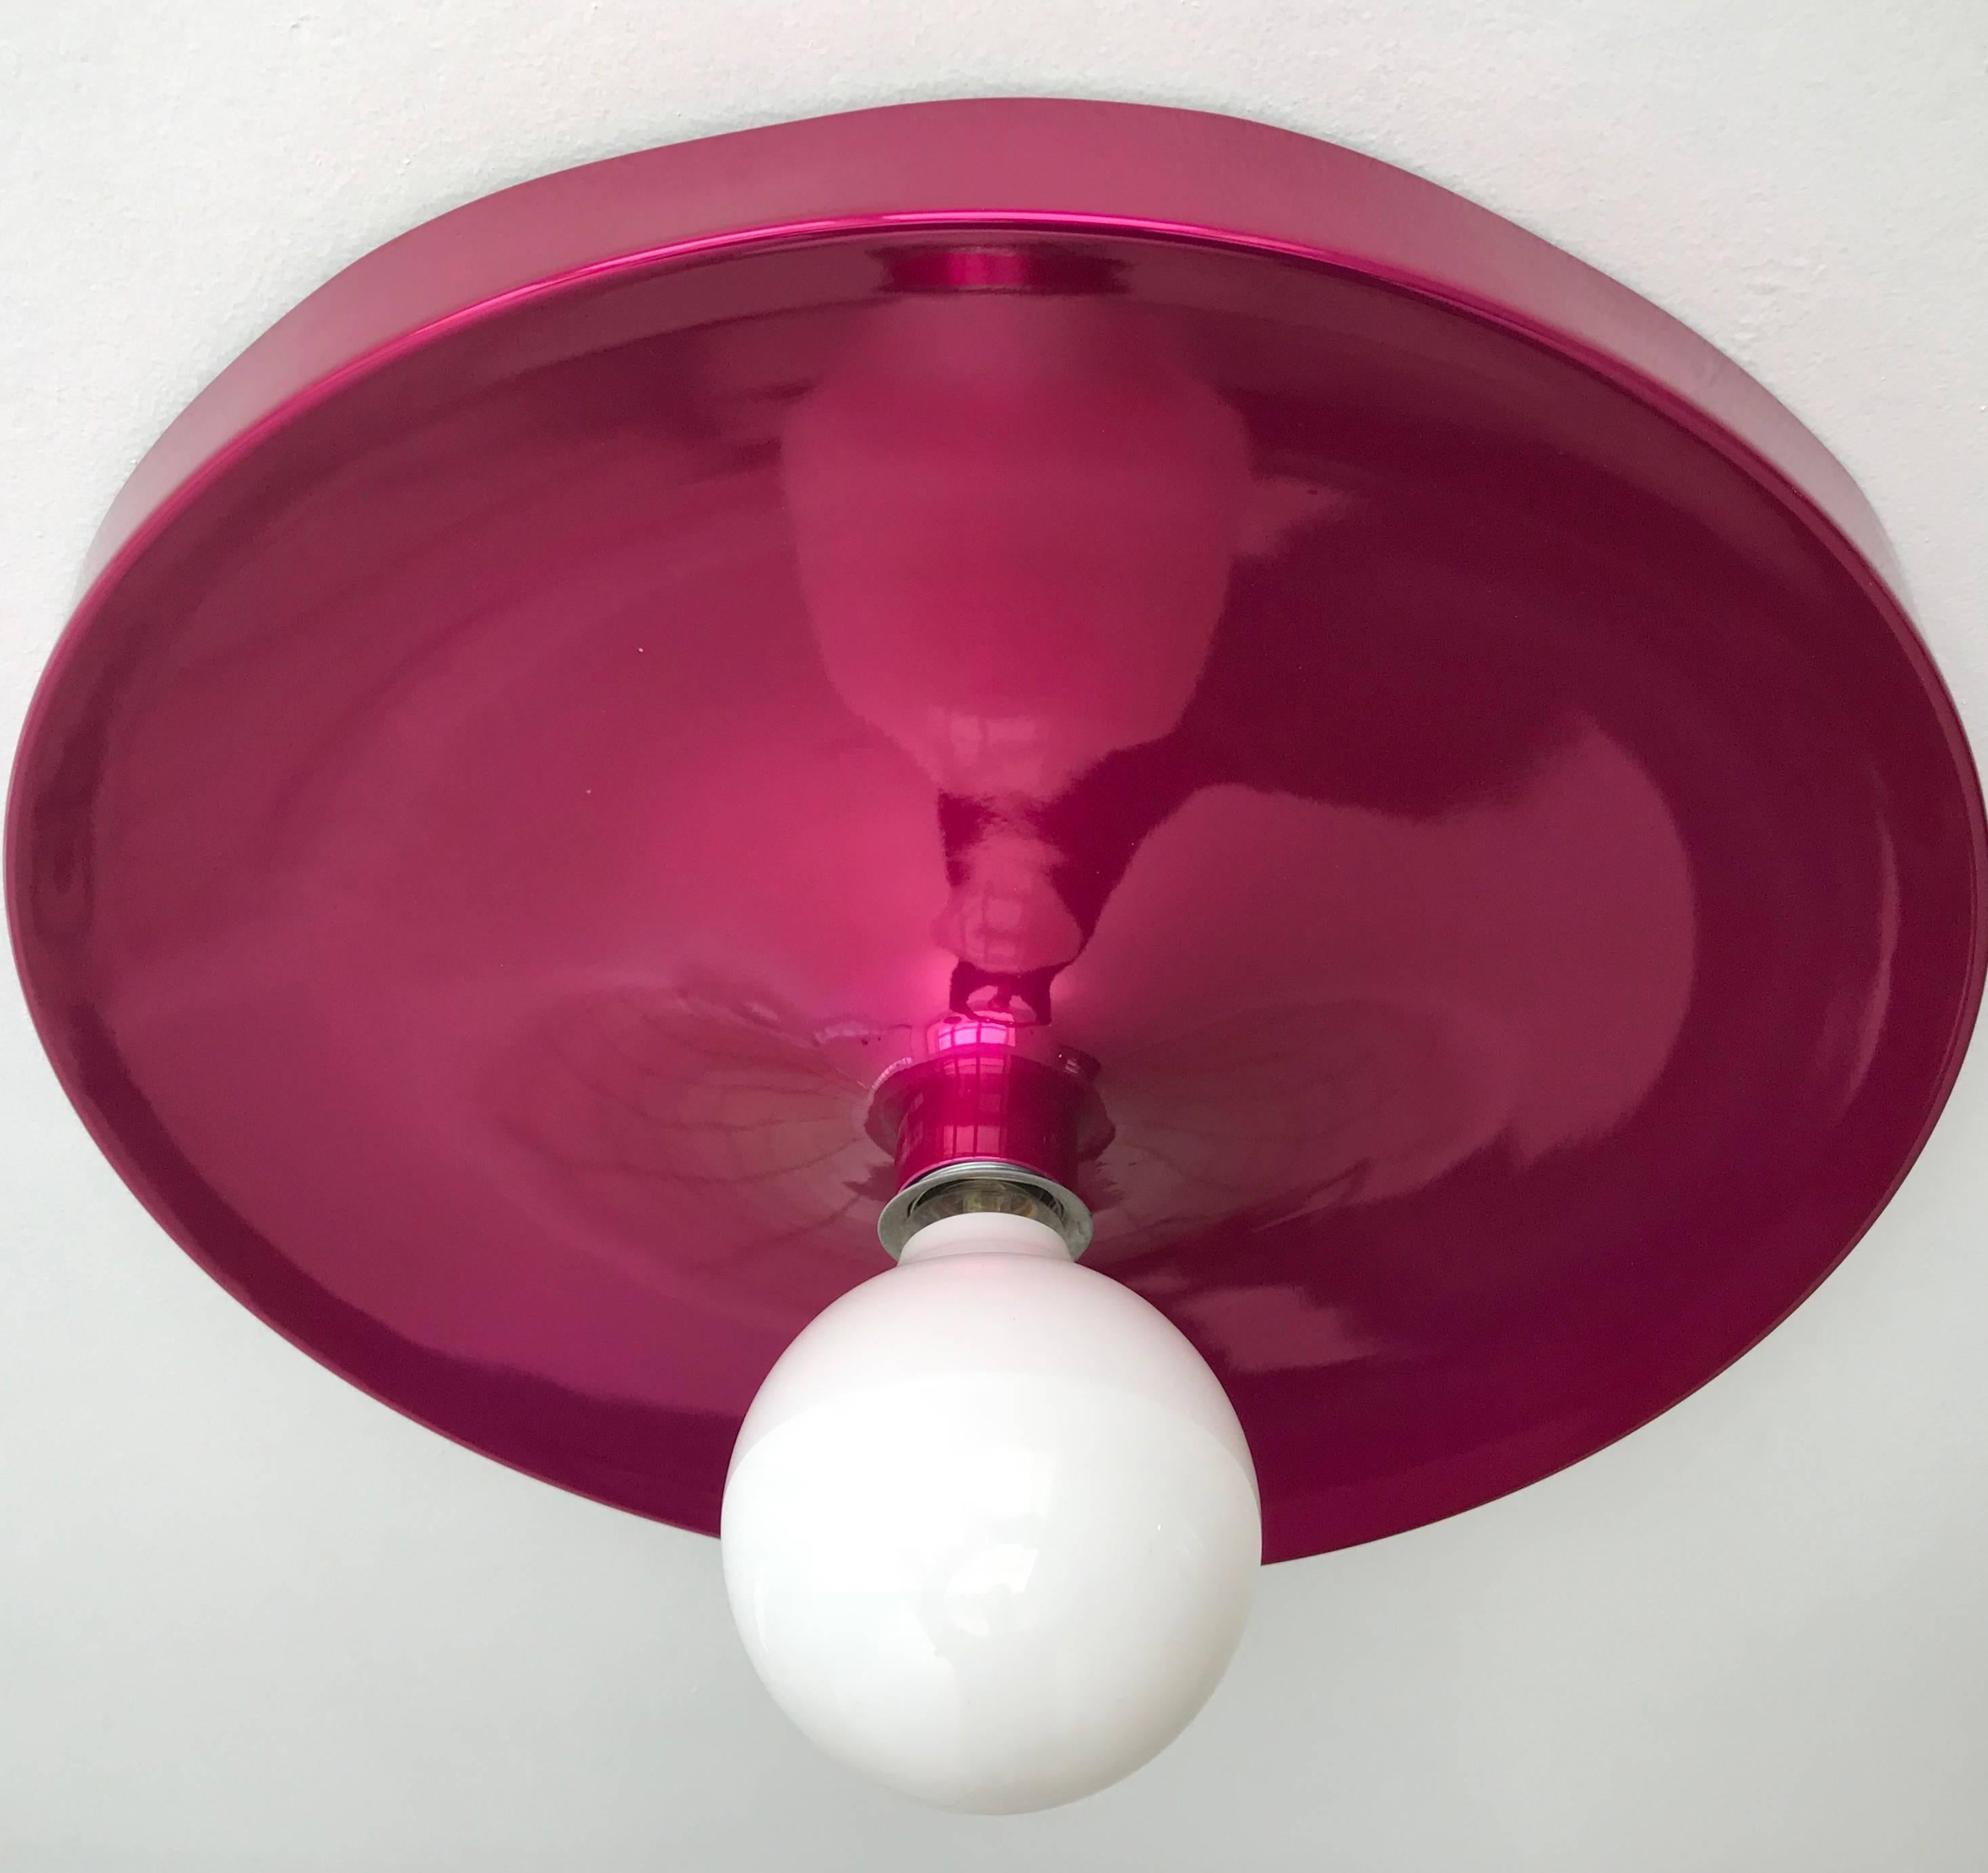 A sleek modern 1970s Space Age German flush ceiling light. The beautiful enamel is razzberry/ Fushia color ina reflective candy coat. Rewired with grounding wire. Charlotte Periand used this lamp in his commission, Les Arcs Ski Resort.